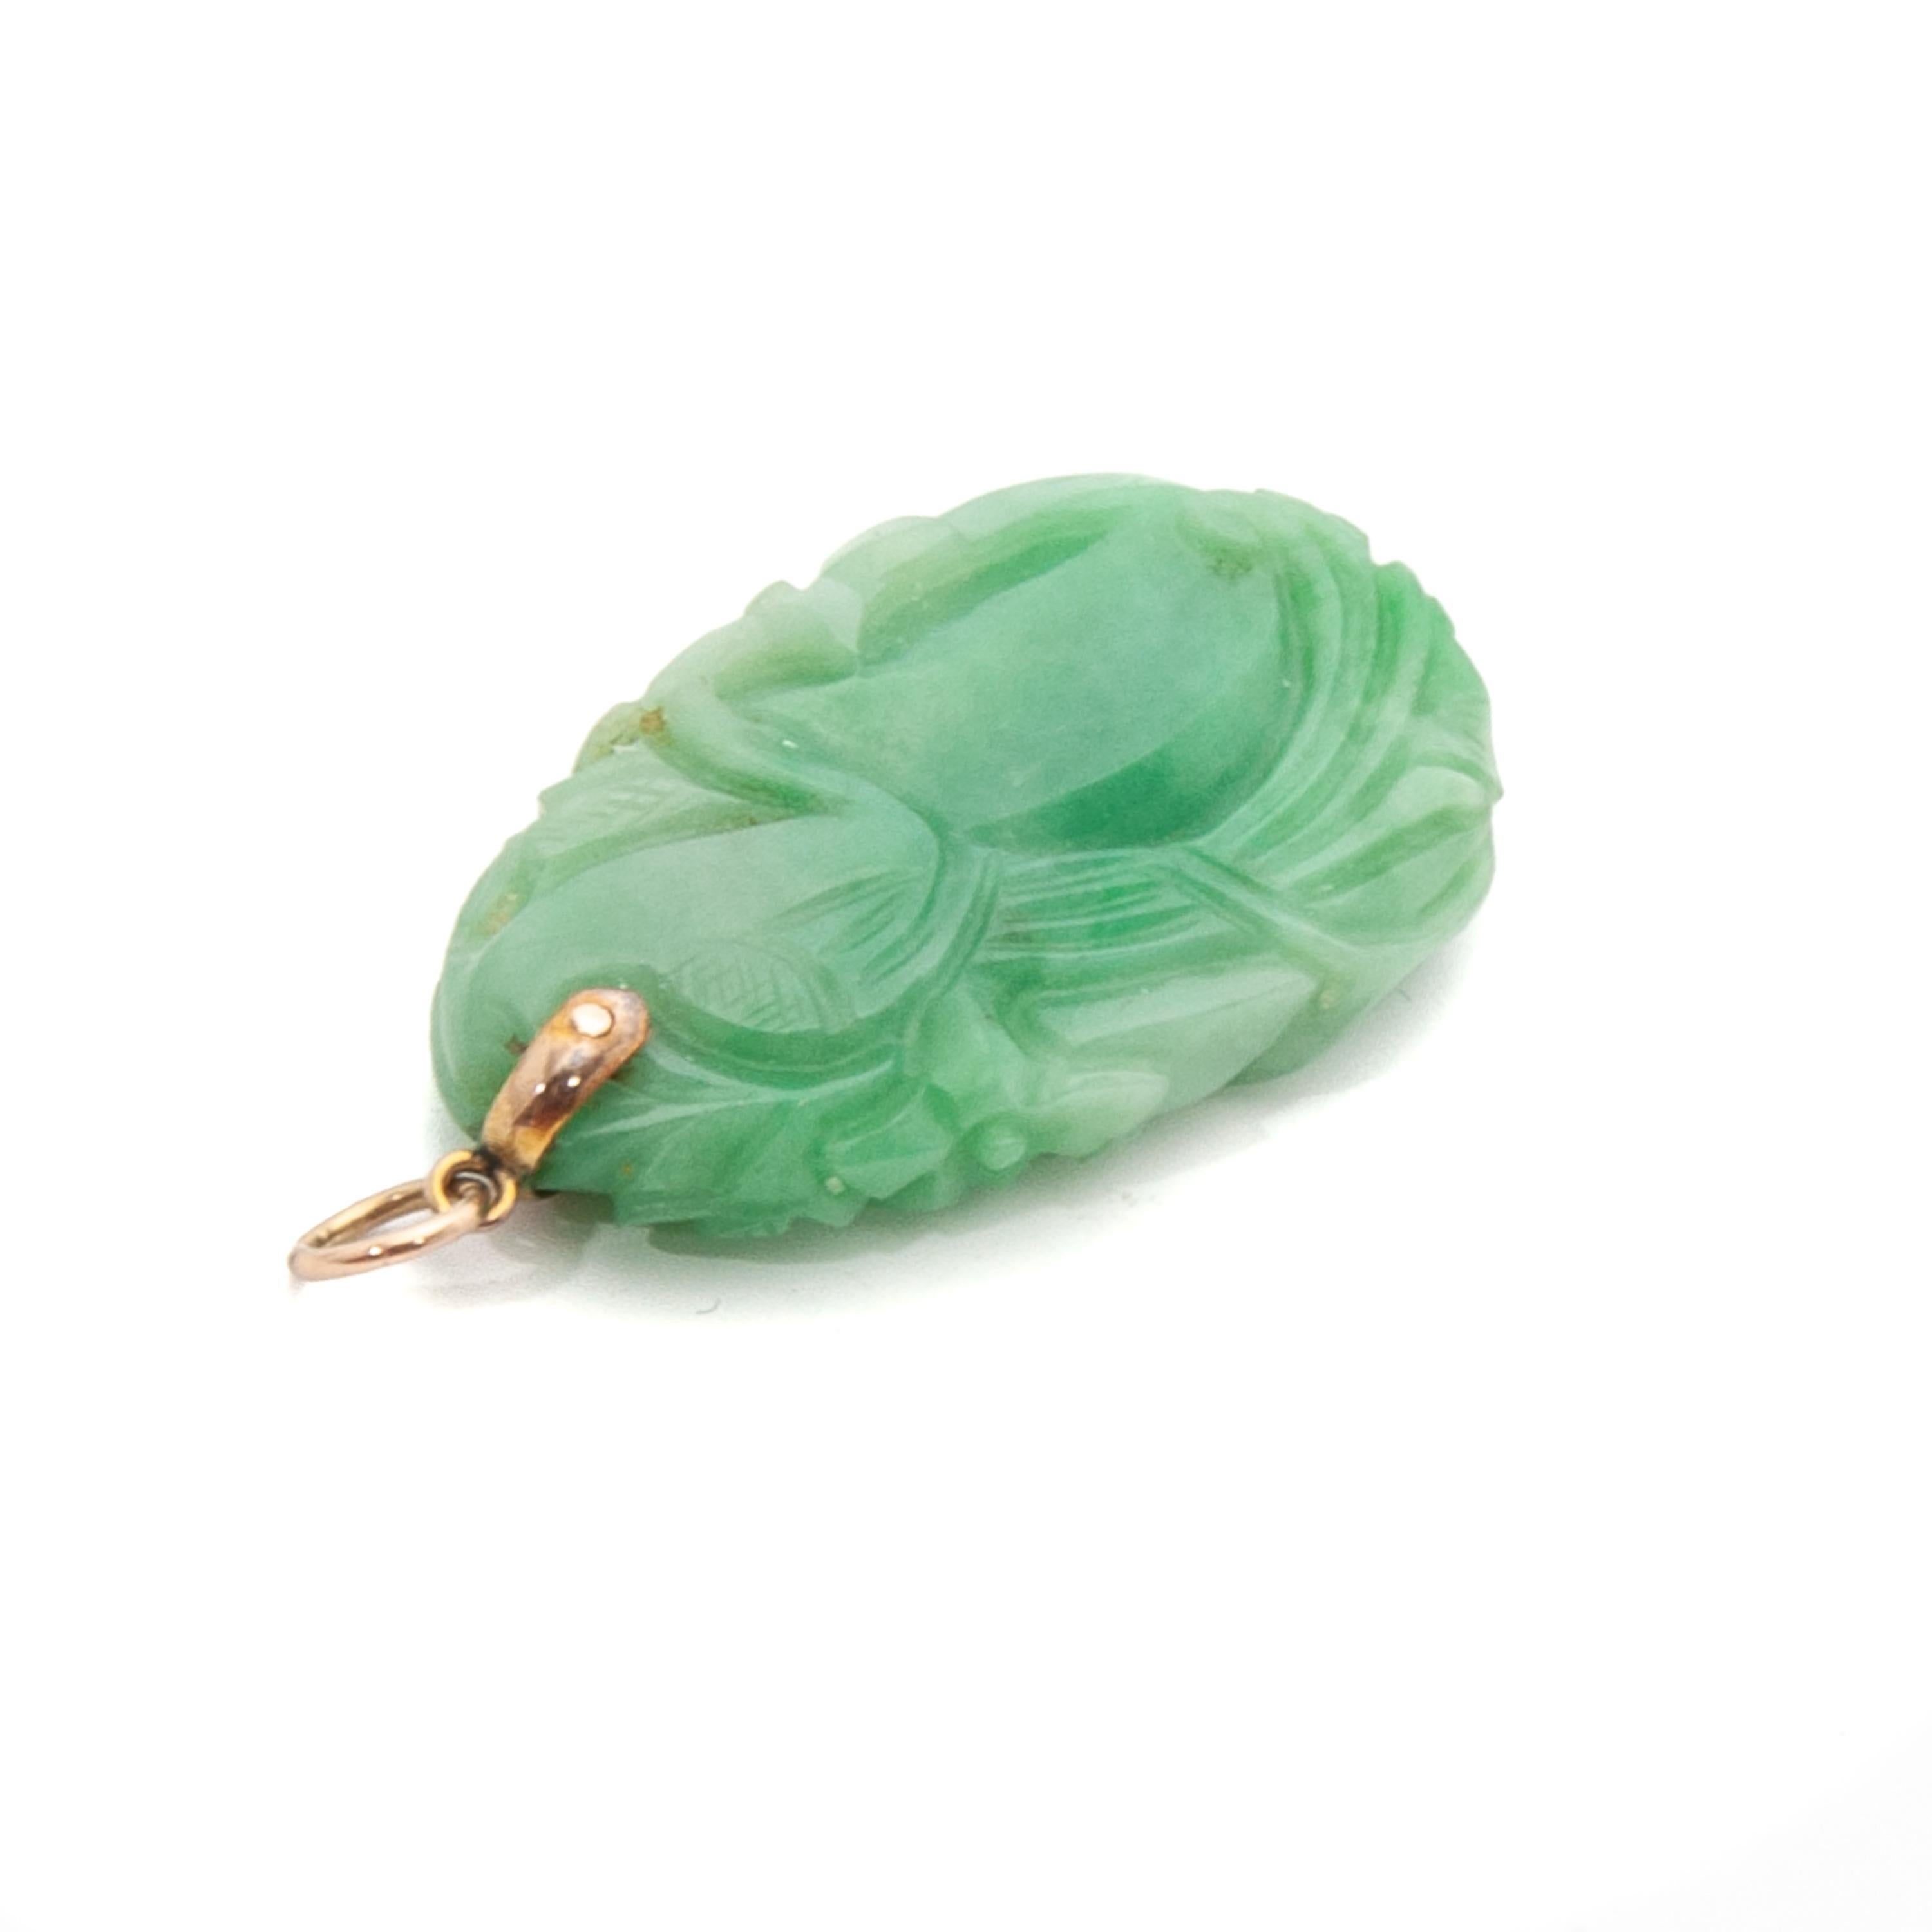 Fish and Floral Carved Green Jade Pendant 3